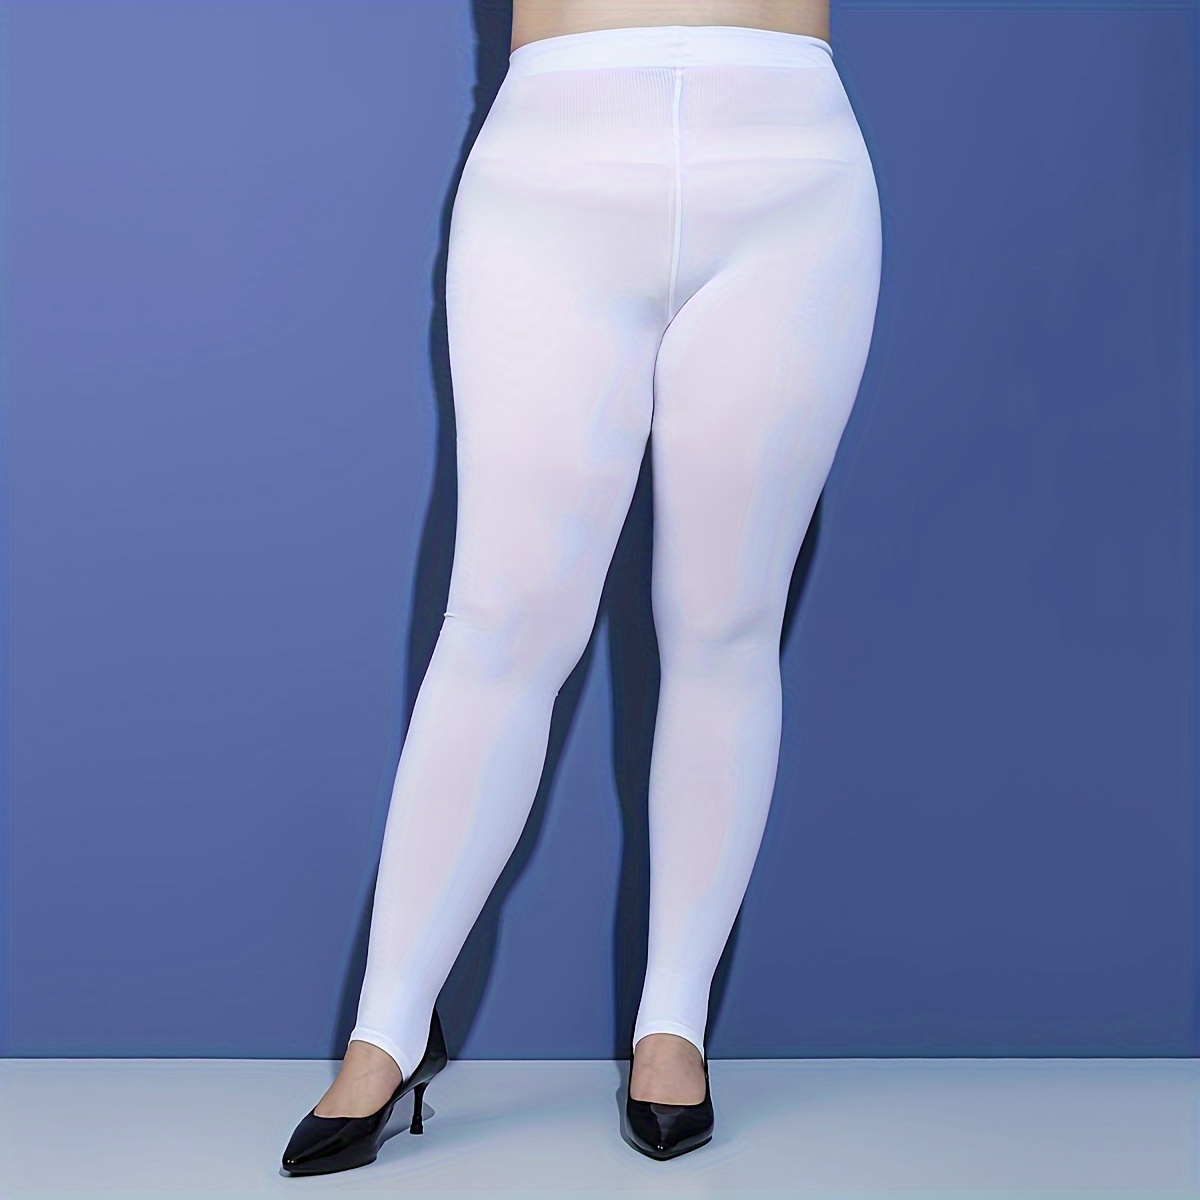 Sexy Transparent Leggings Pantyhose High Elastic Sheer Thin Skinny Thin  Yoga Pants Trousers Tights Clothing For Women